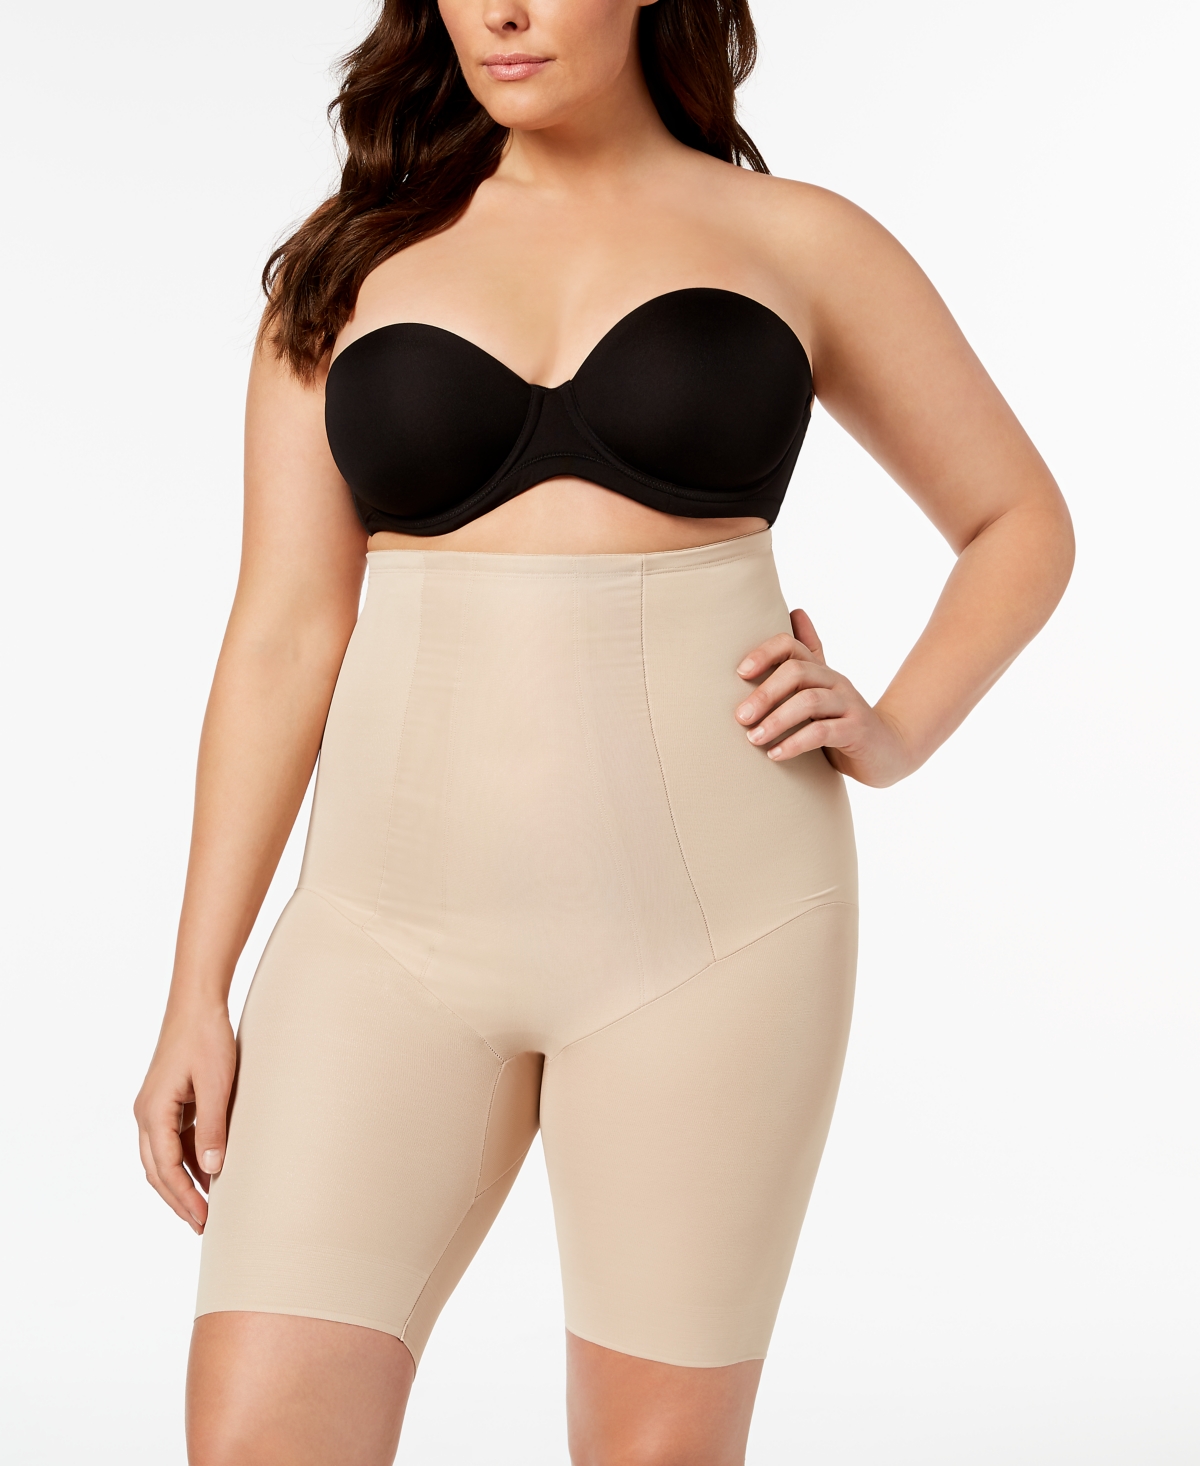 UPC 080225103250 product image for Miraclesuit Extra Firm Tummy-Control High Waist Thigh Slimmer 2709 | upcitemdb.com